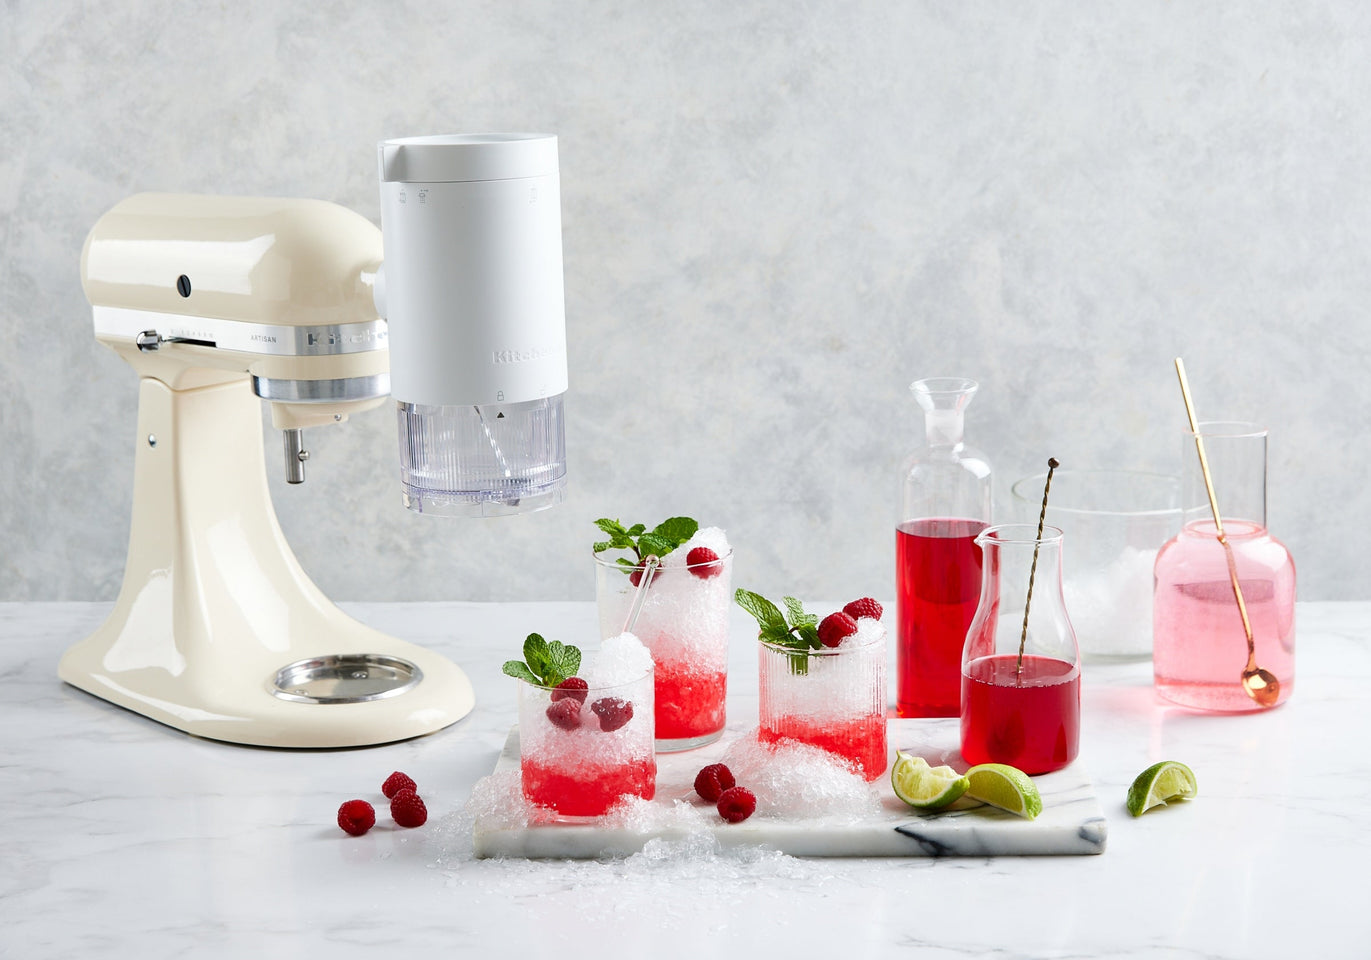 Cool Off This Summer With The New KitchenAid Ice Shaver Attachment!